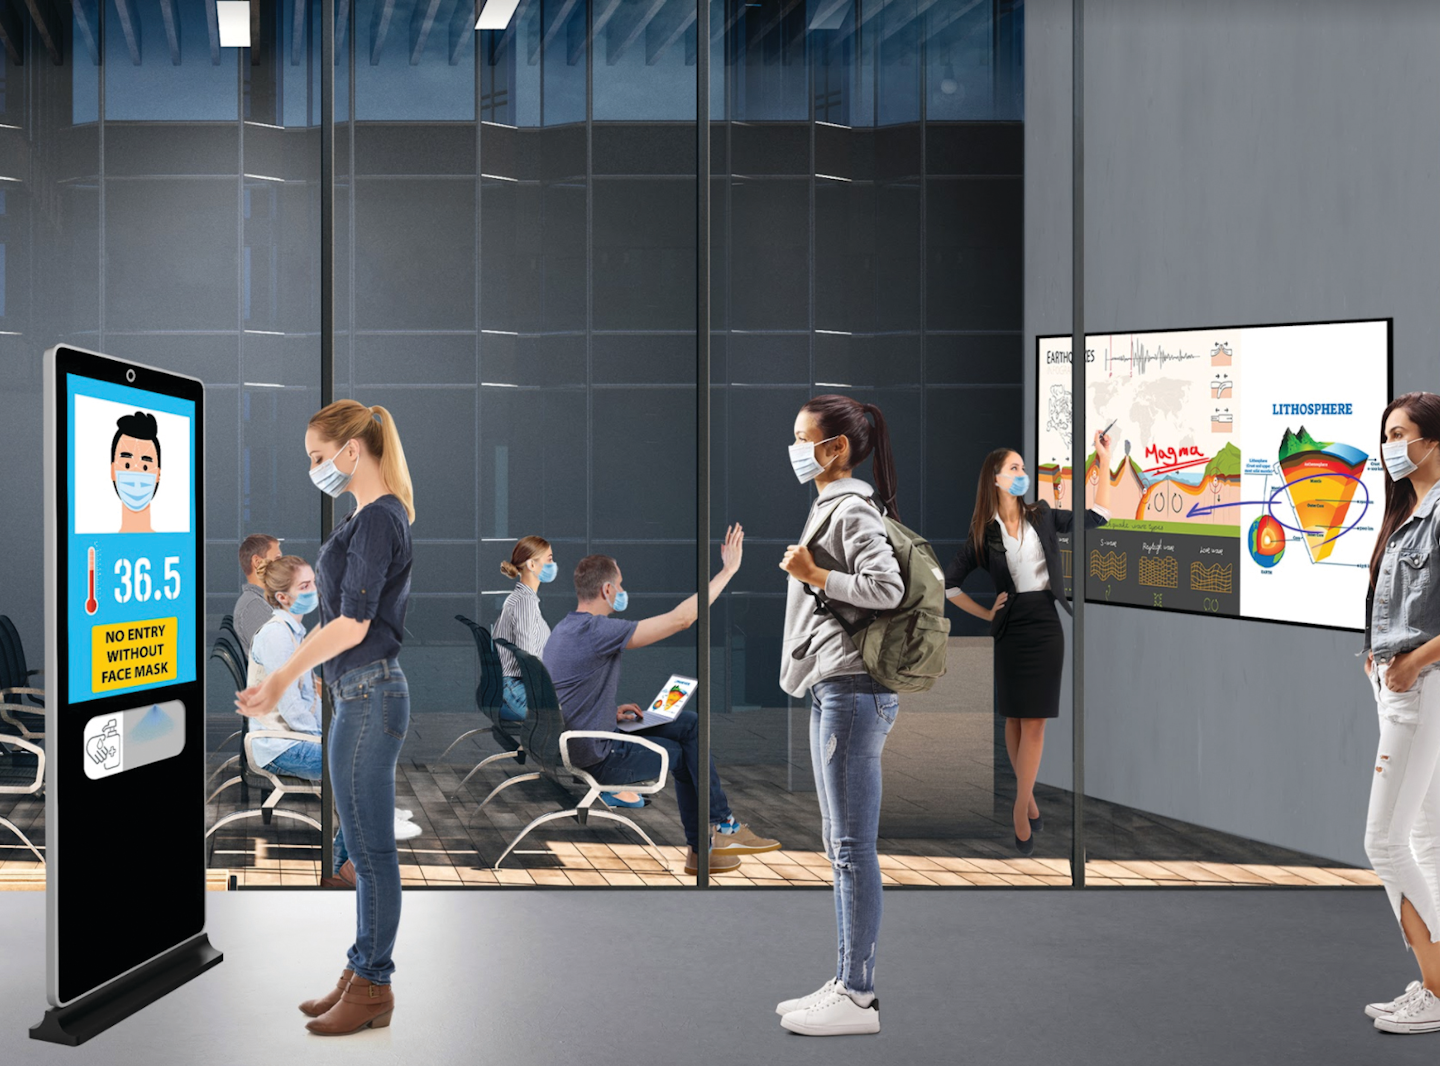 LG Business Solutions’ new wellness kiosks aim to limit unnecessary interaction between attendees and staff.